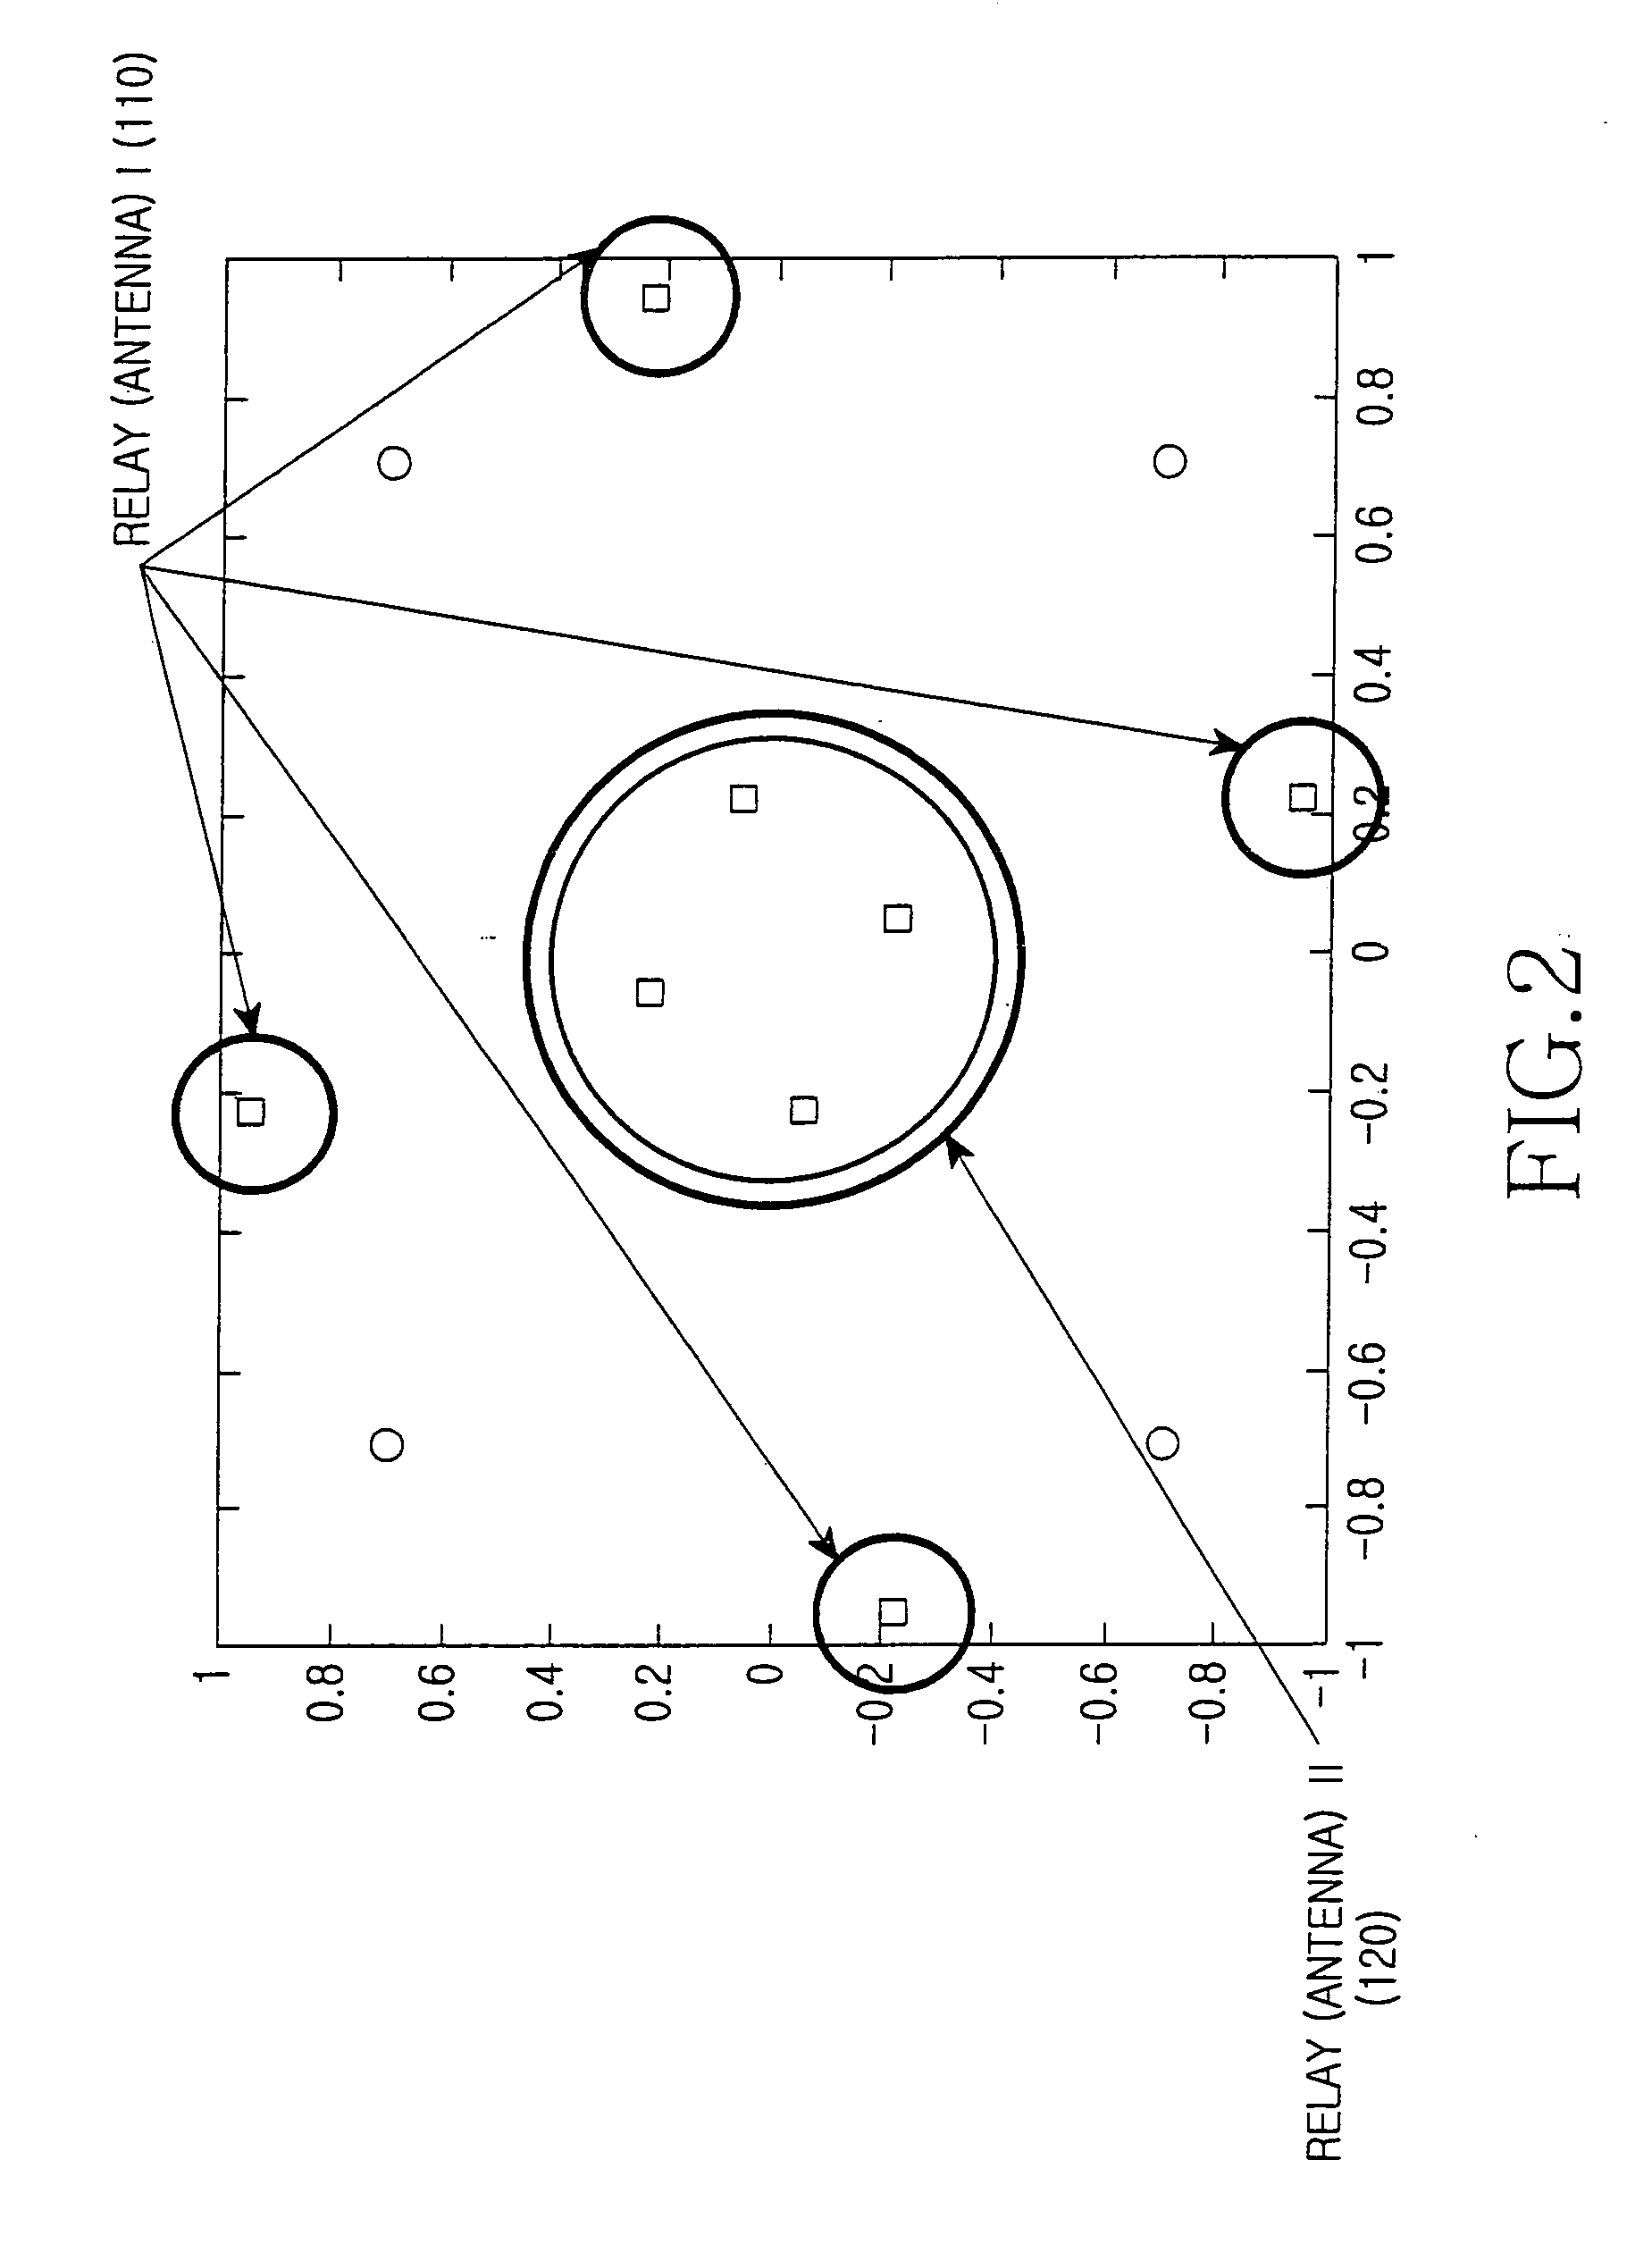 Orthogonal frequency division multiplexing communication system, multi-hop system, relay station, and spatially layered transmission mode